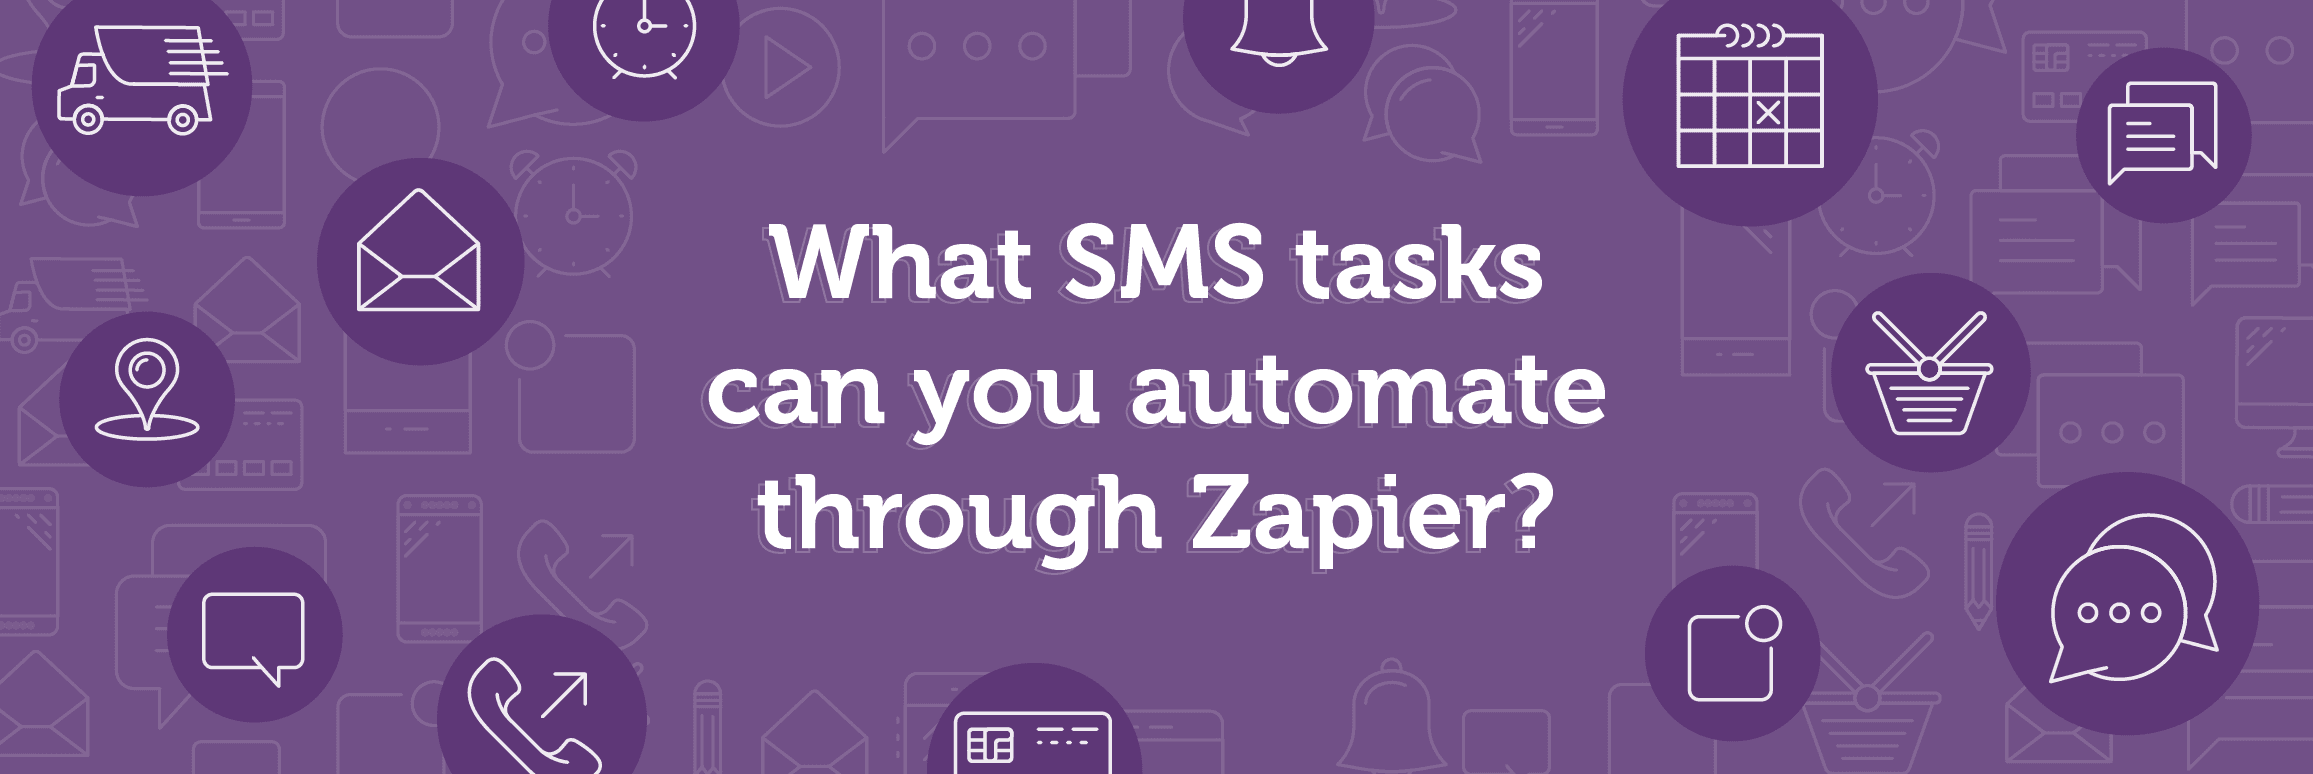 what sms tasks can you automate through zapier